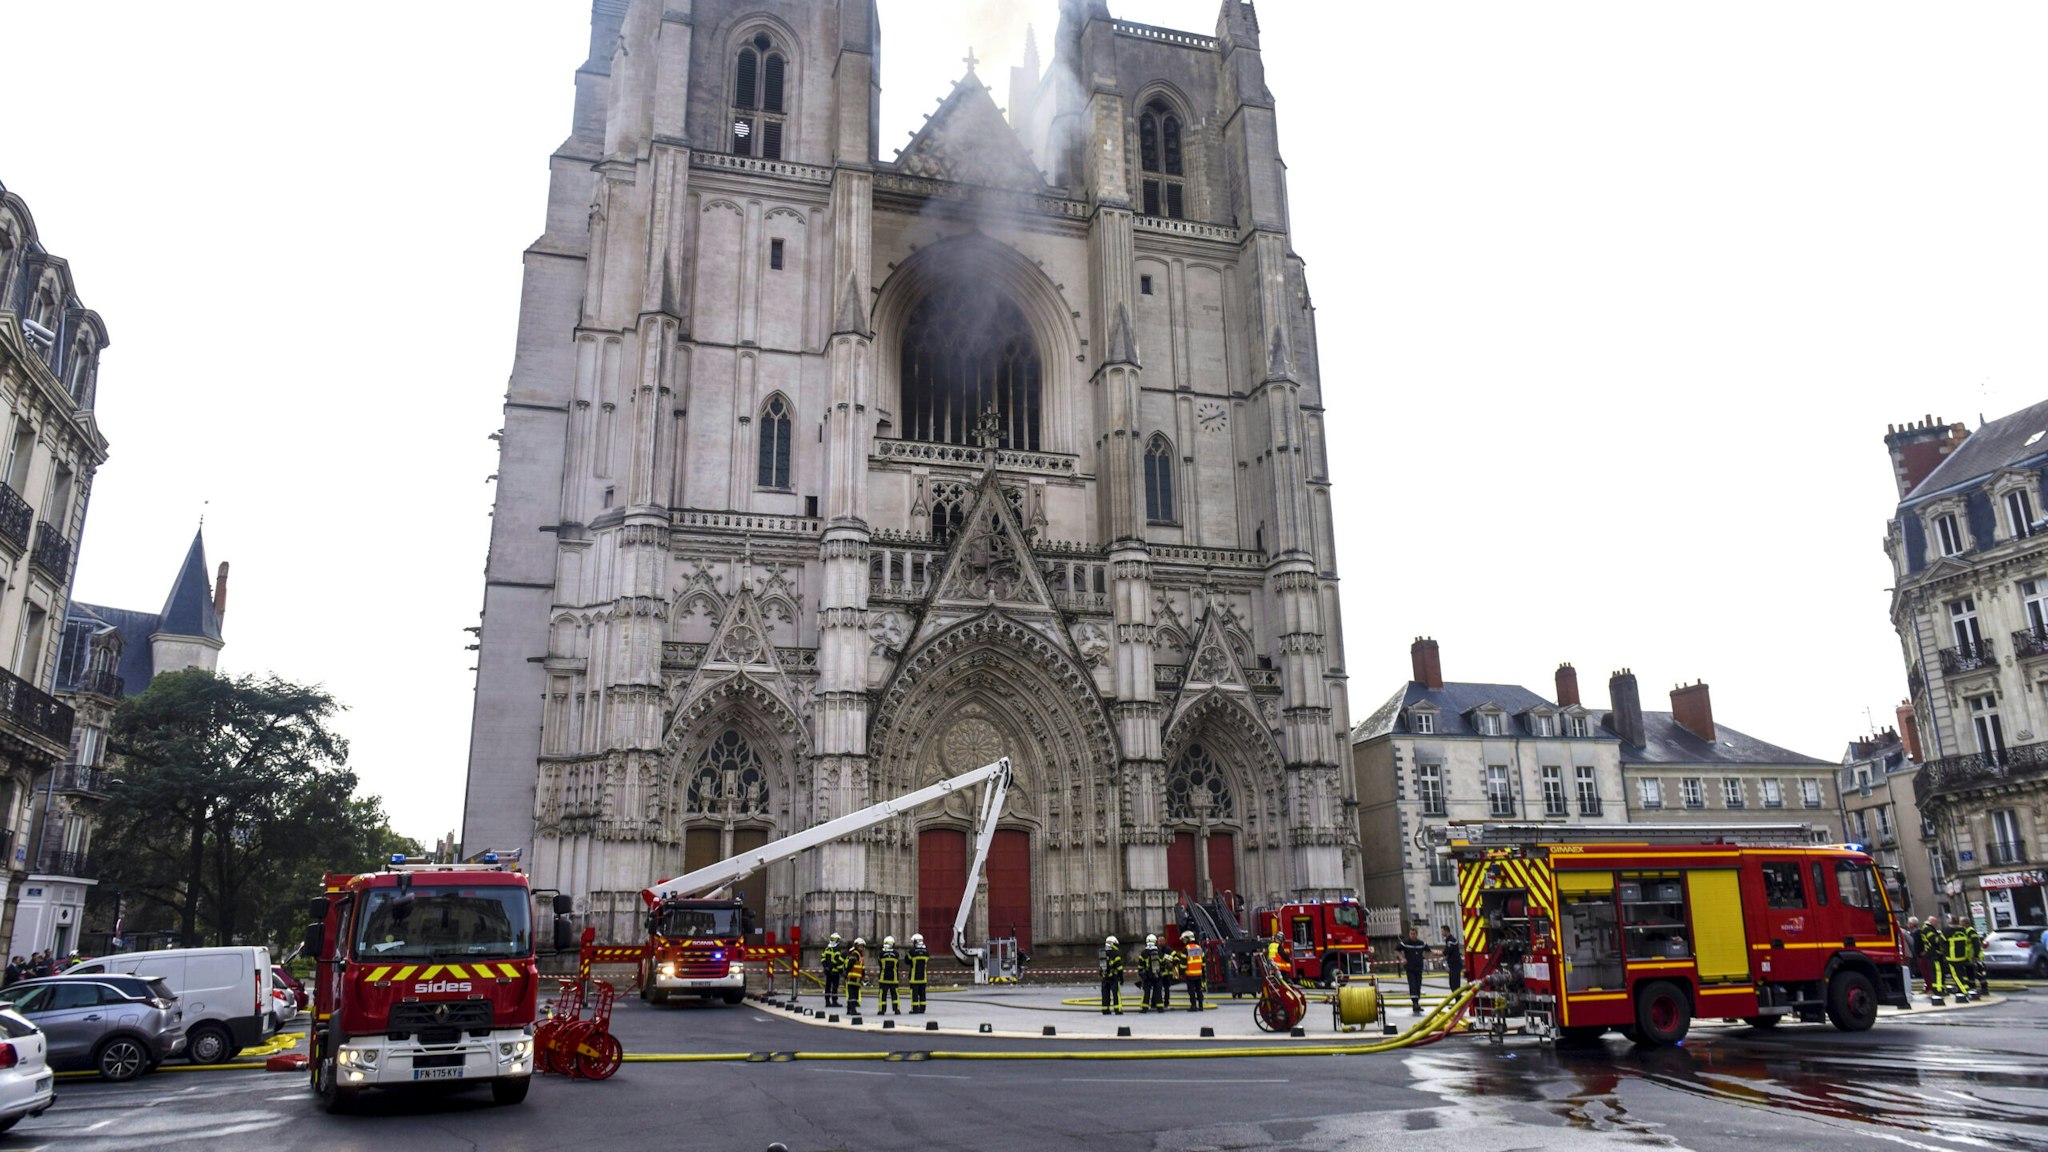 Firefighters are at work to put out a fire at the Saint-Pierre-et-Saint-Paul cathedral in Nantes, western France, on July 18, 2020. - A blaze that broke inside the gothic cathedral of Nantes on July 18 has been contained, emergency officials said, adding that the damage was not comparable to last year's fire at Notre-Dame cathedral in Paris. "The damage is concentrated on the organ, which seems to be completely destroyed. Its platform is very unstable and could collapse," regional fire chief General Laurent Ferlay told a press briefing in front of the cathedral.